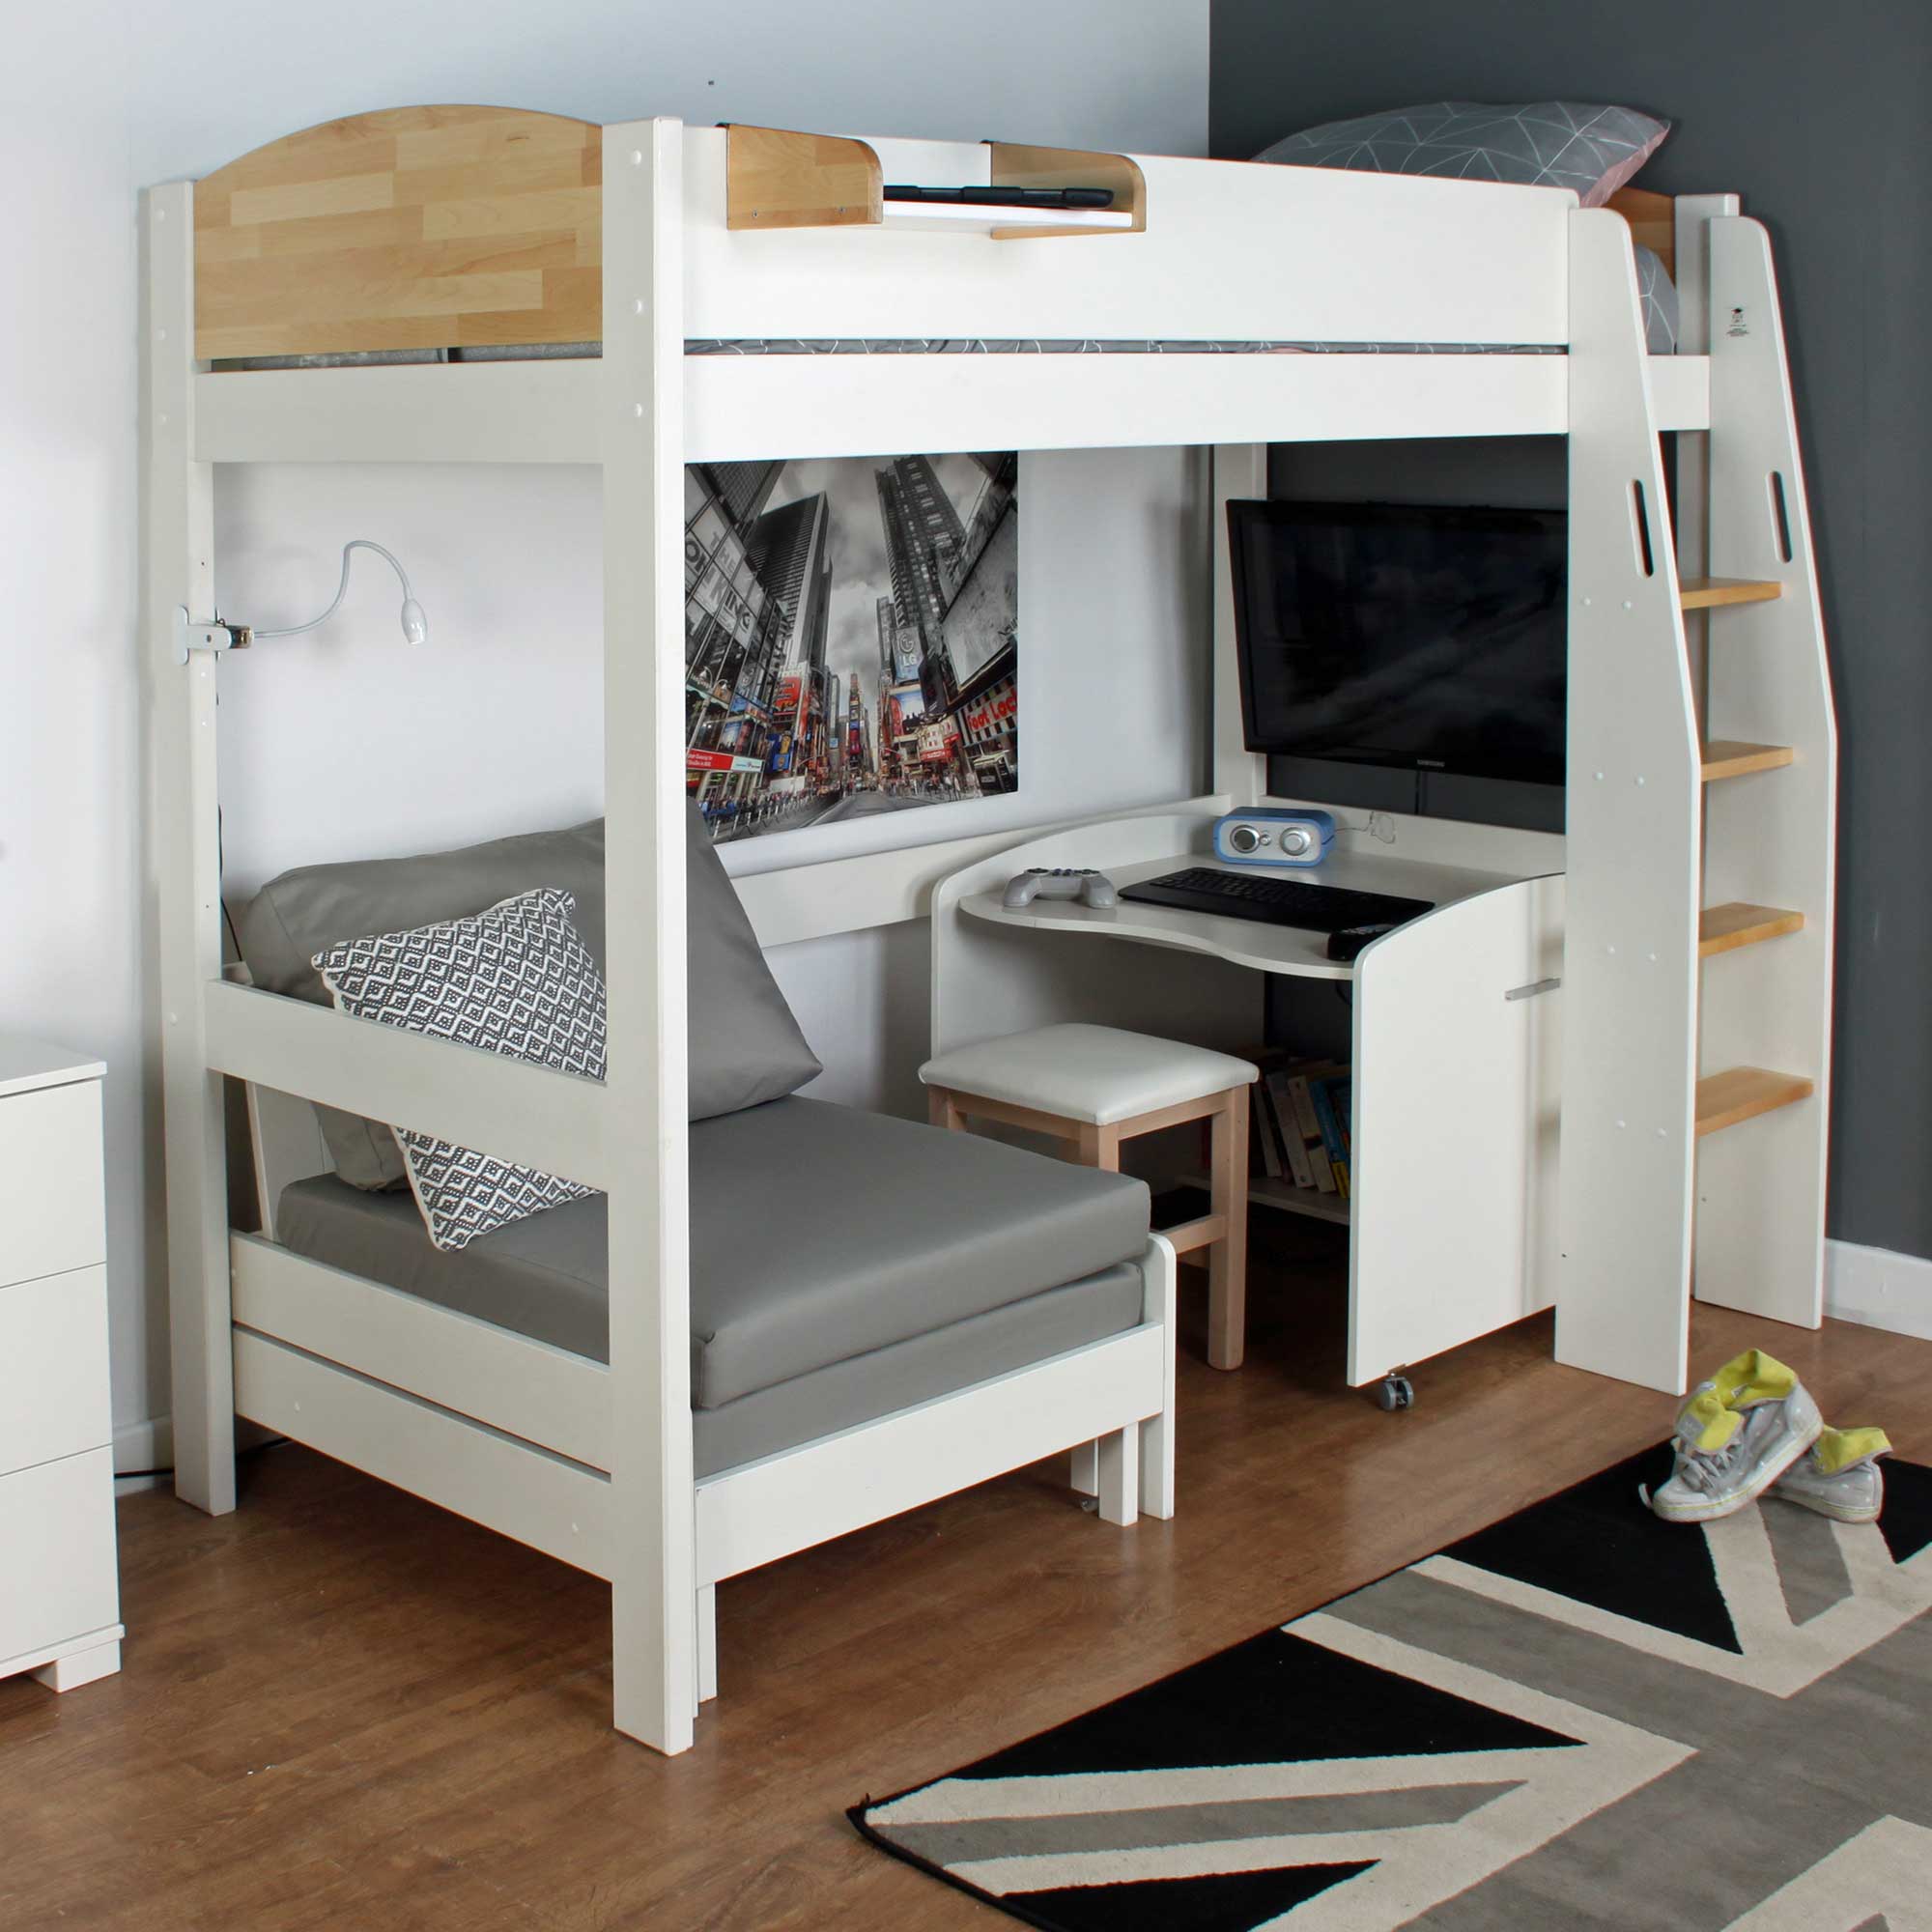 Bunk Bed With Futon And Desk Welcome To, Bunk Bed With Desk And Futon Underneath